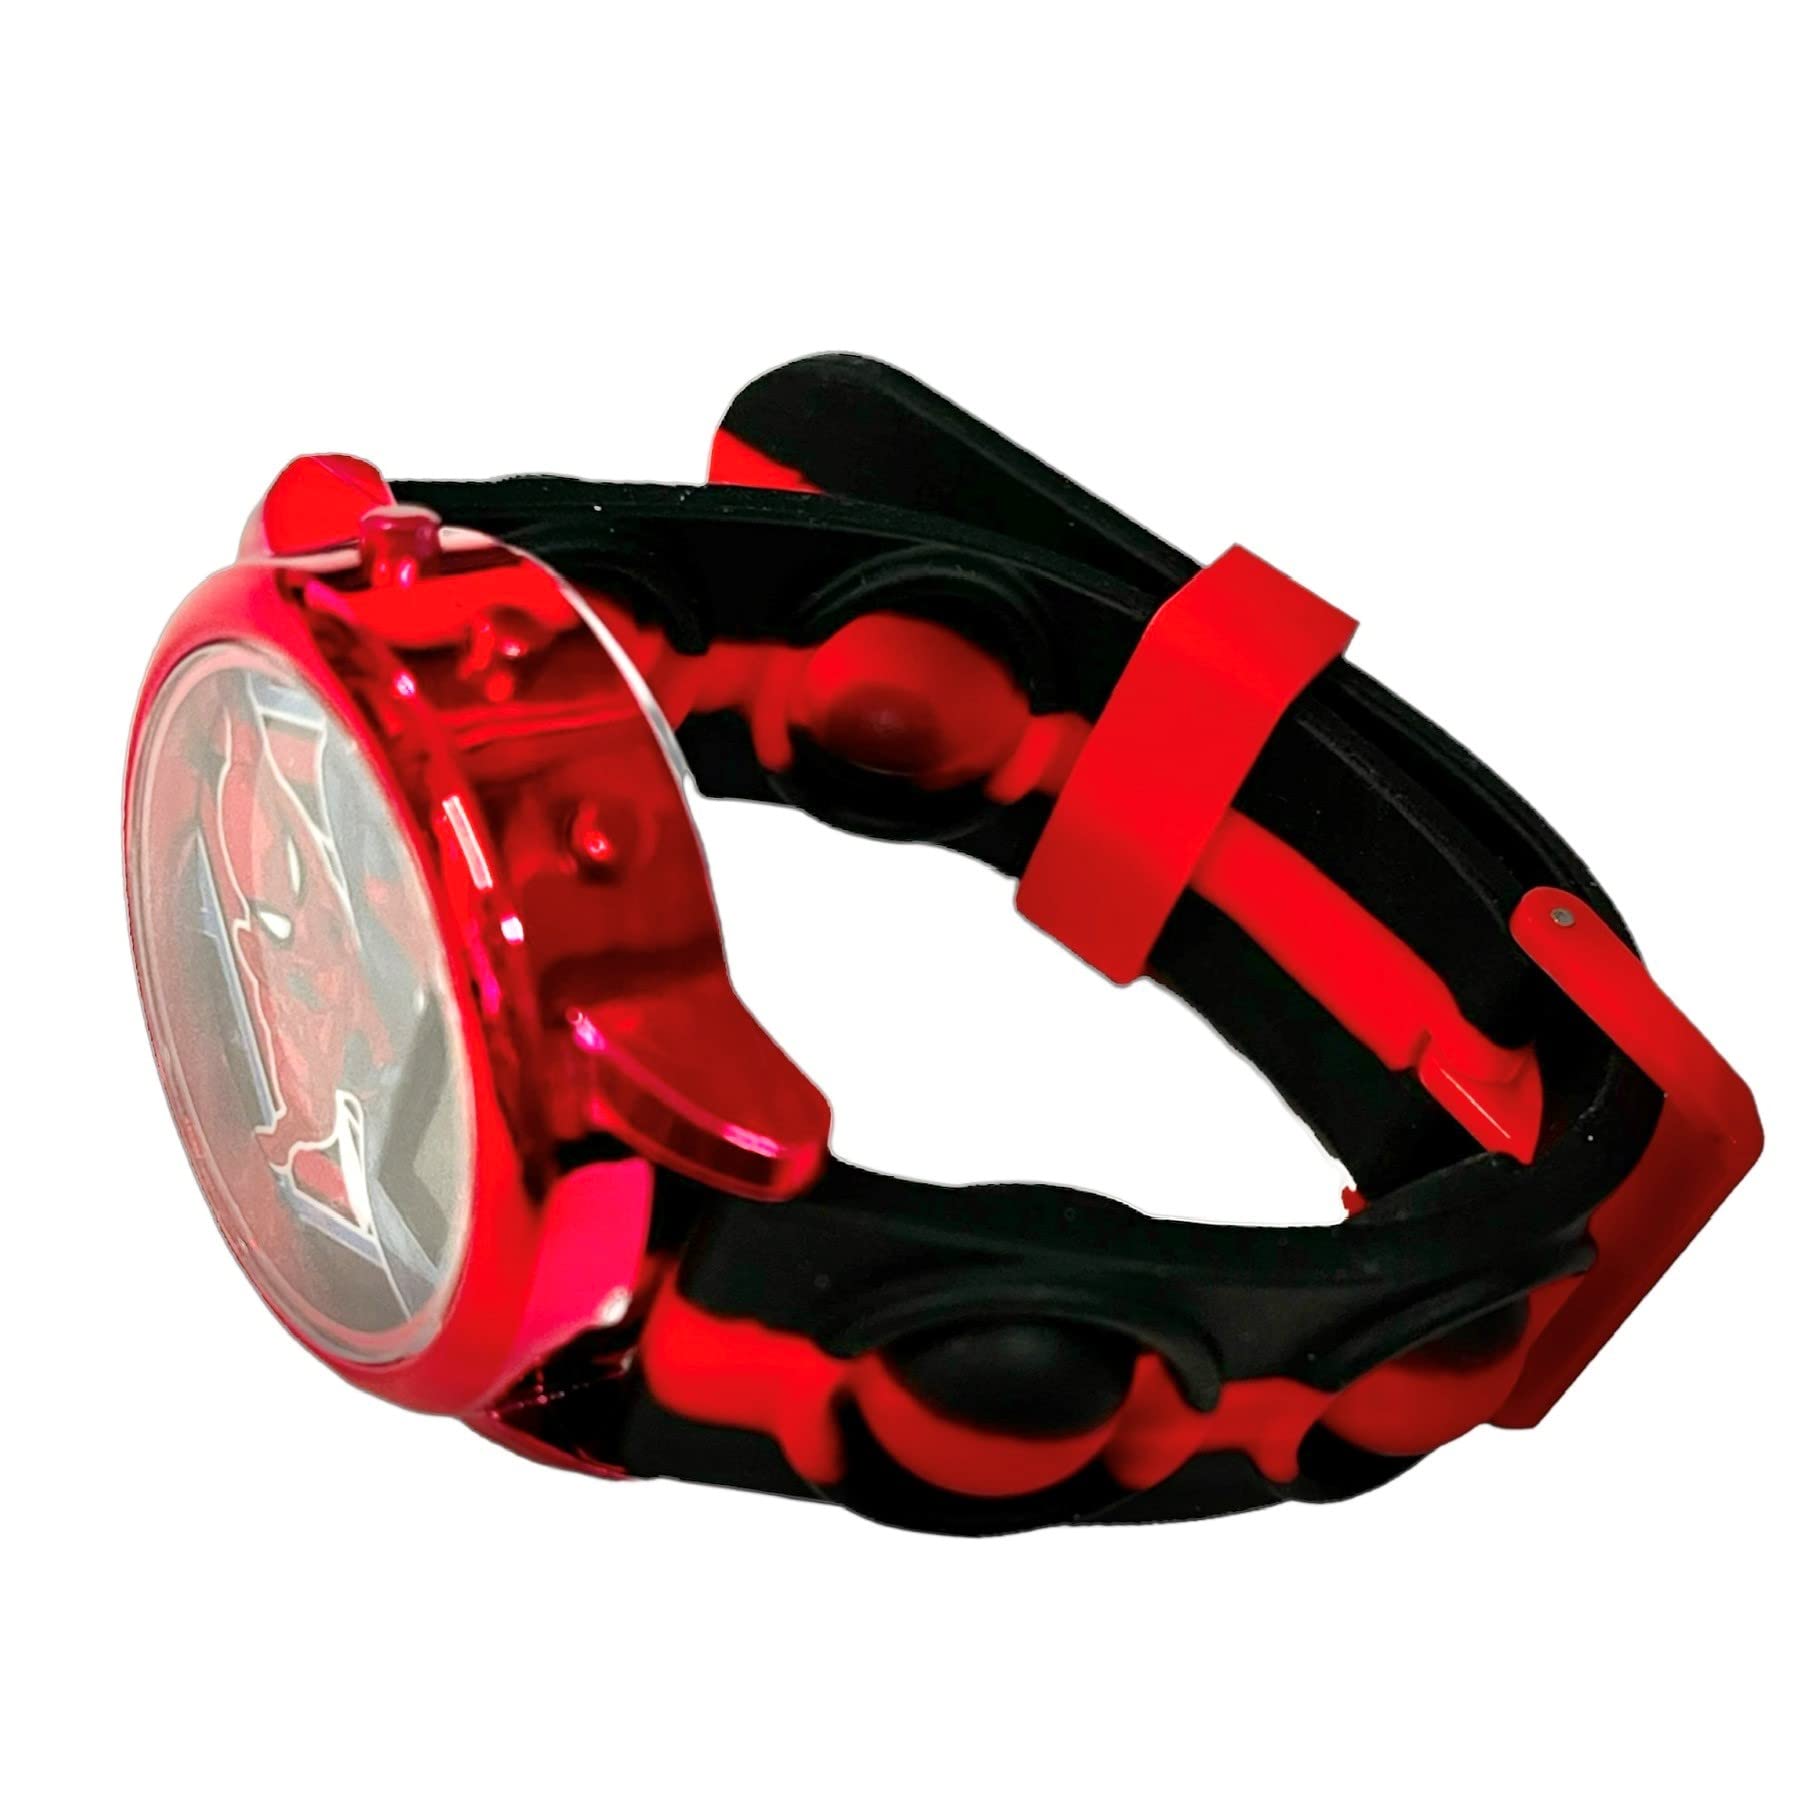 Accutime Kids Marvel Spiderman Red Digital LCD Quartz Wrist-Watch with Multicolor Flashing Popper Strap for Boys, Girls and Toddlers (Model: SPD4845AZ)